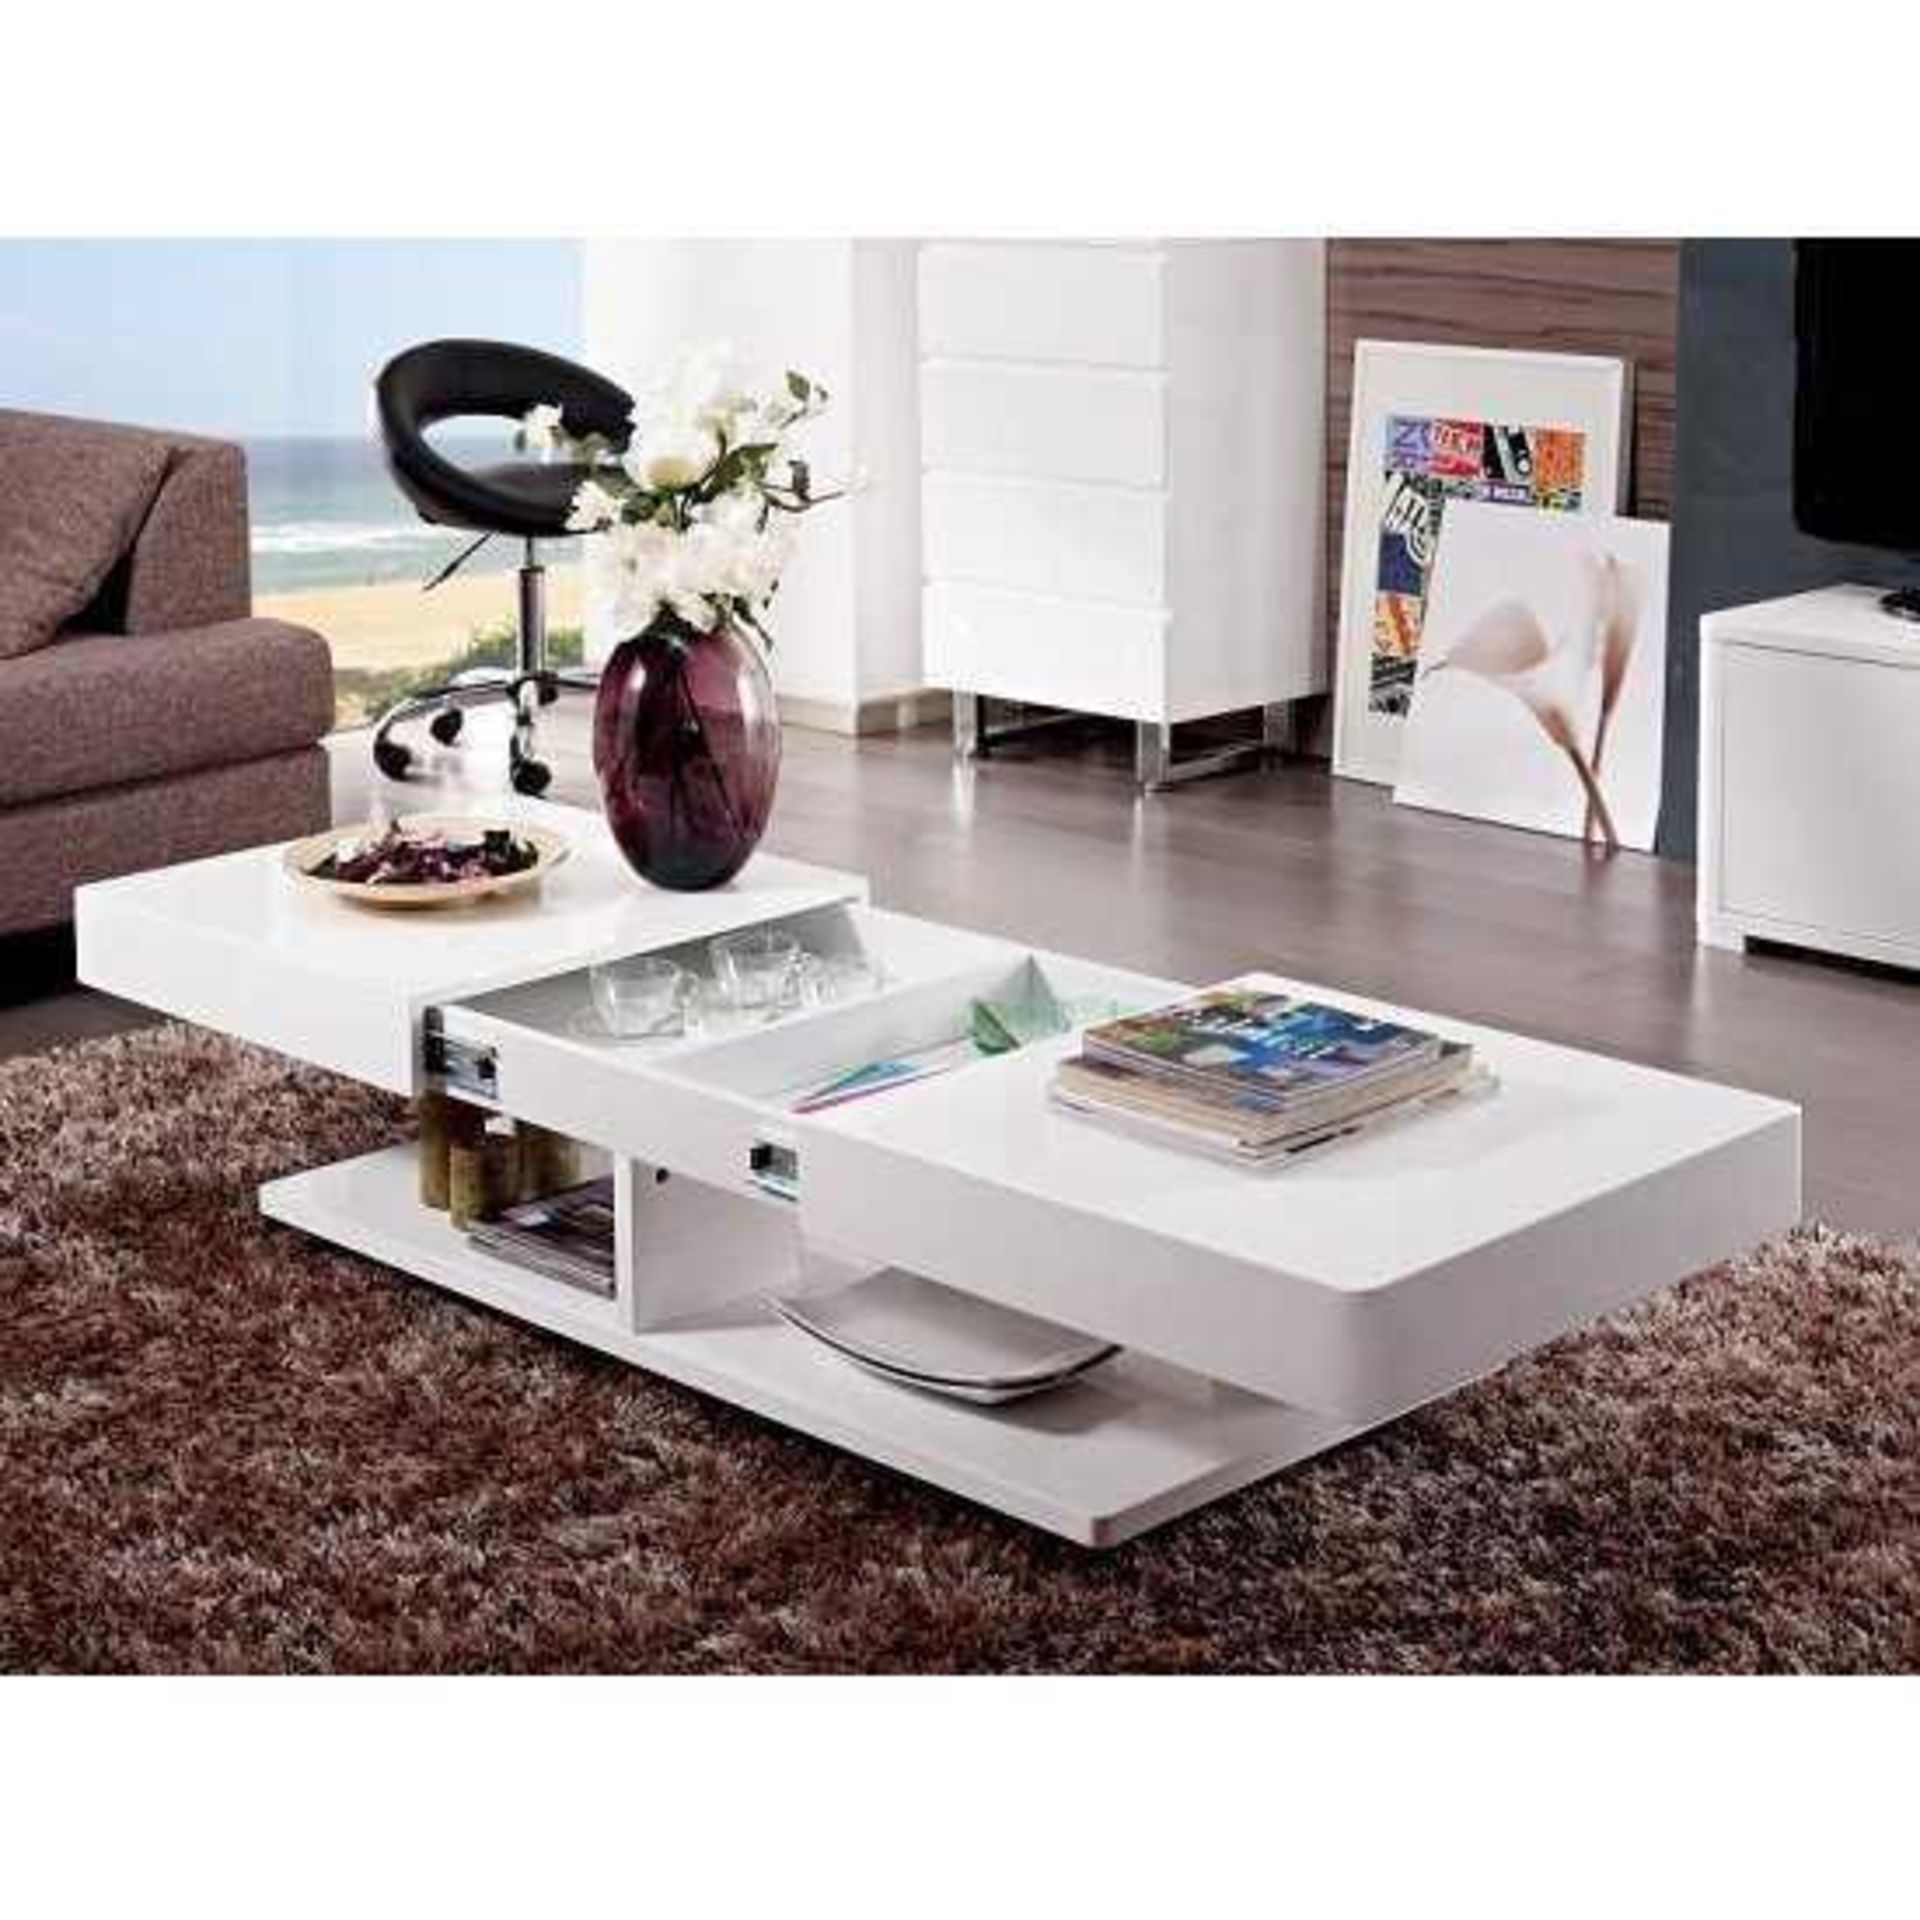 Boxed Verona 120-198X36X60Cm White High Gloss Storage Coffee Table RRP £385(Appraisals Available - Image 2 of 3